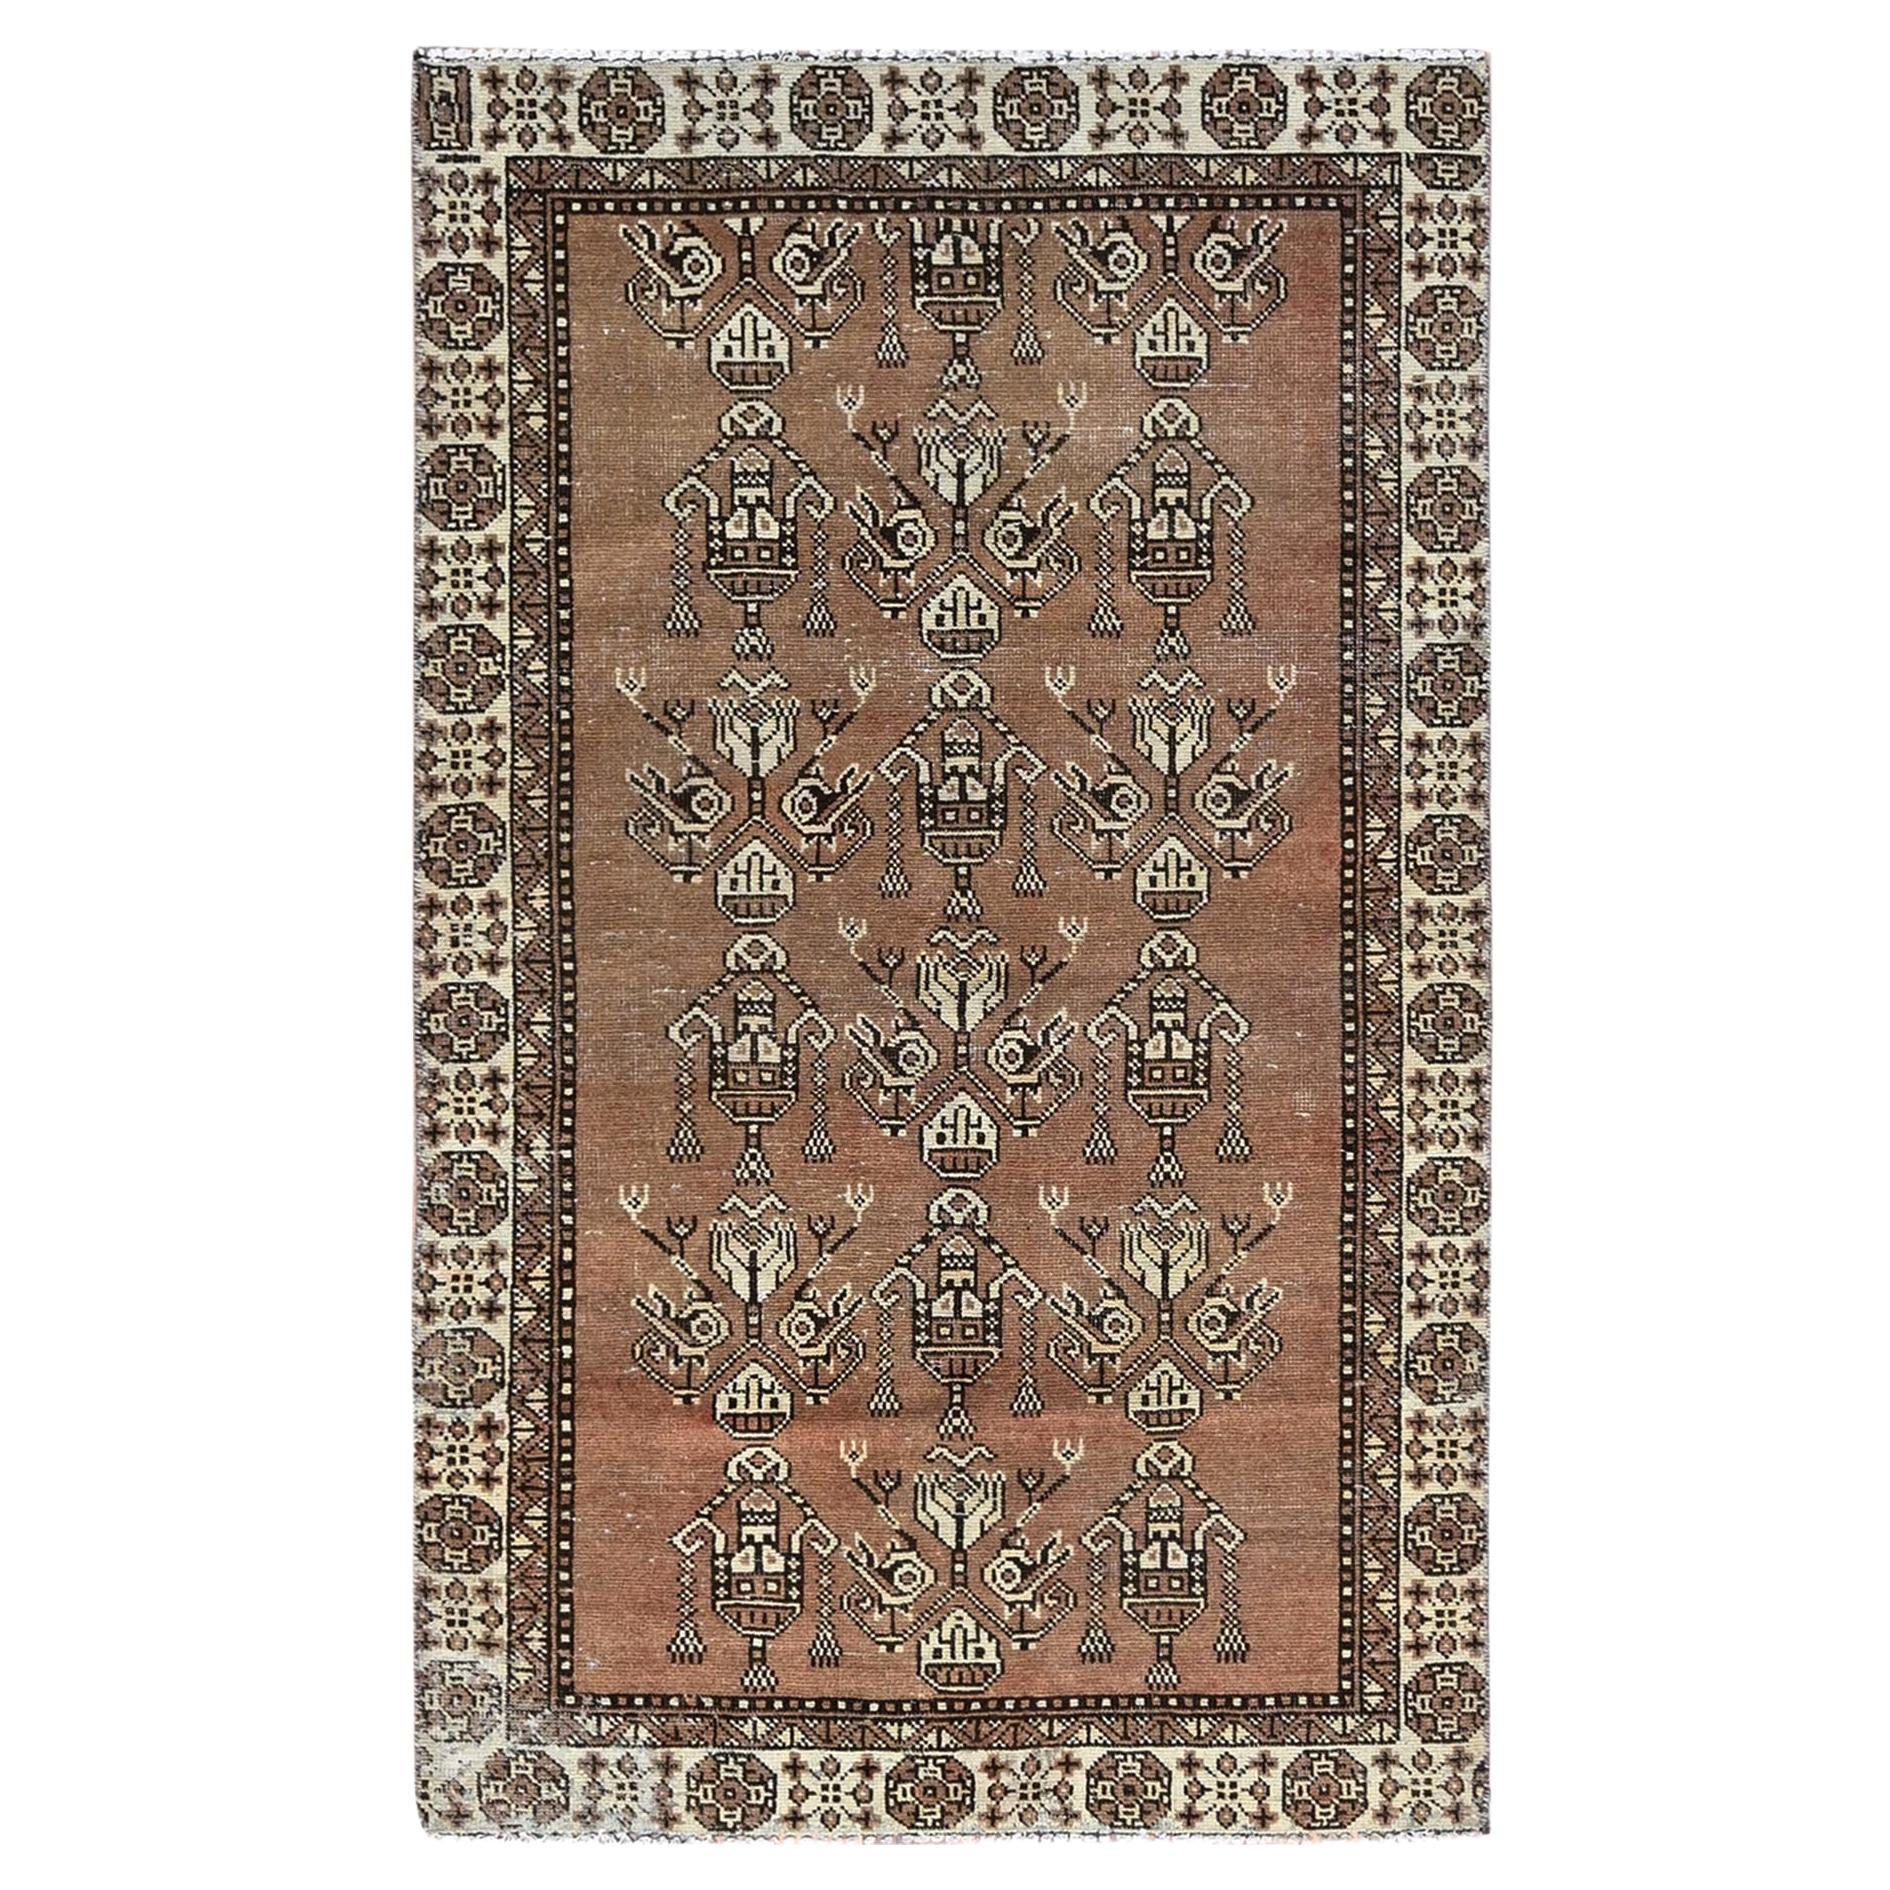 Brown Evenly Worn Natural Wool Vintage Persian Baluch Hand Knotted Clean Rug